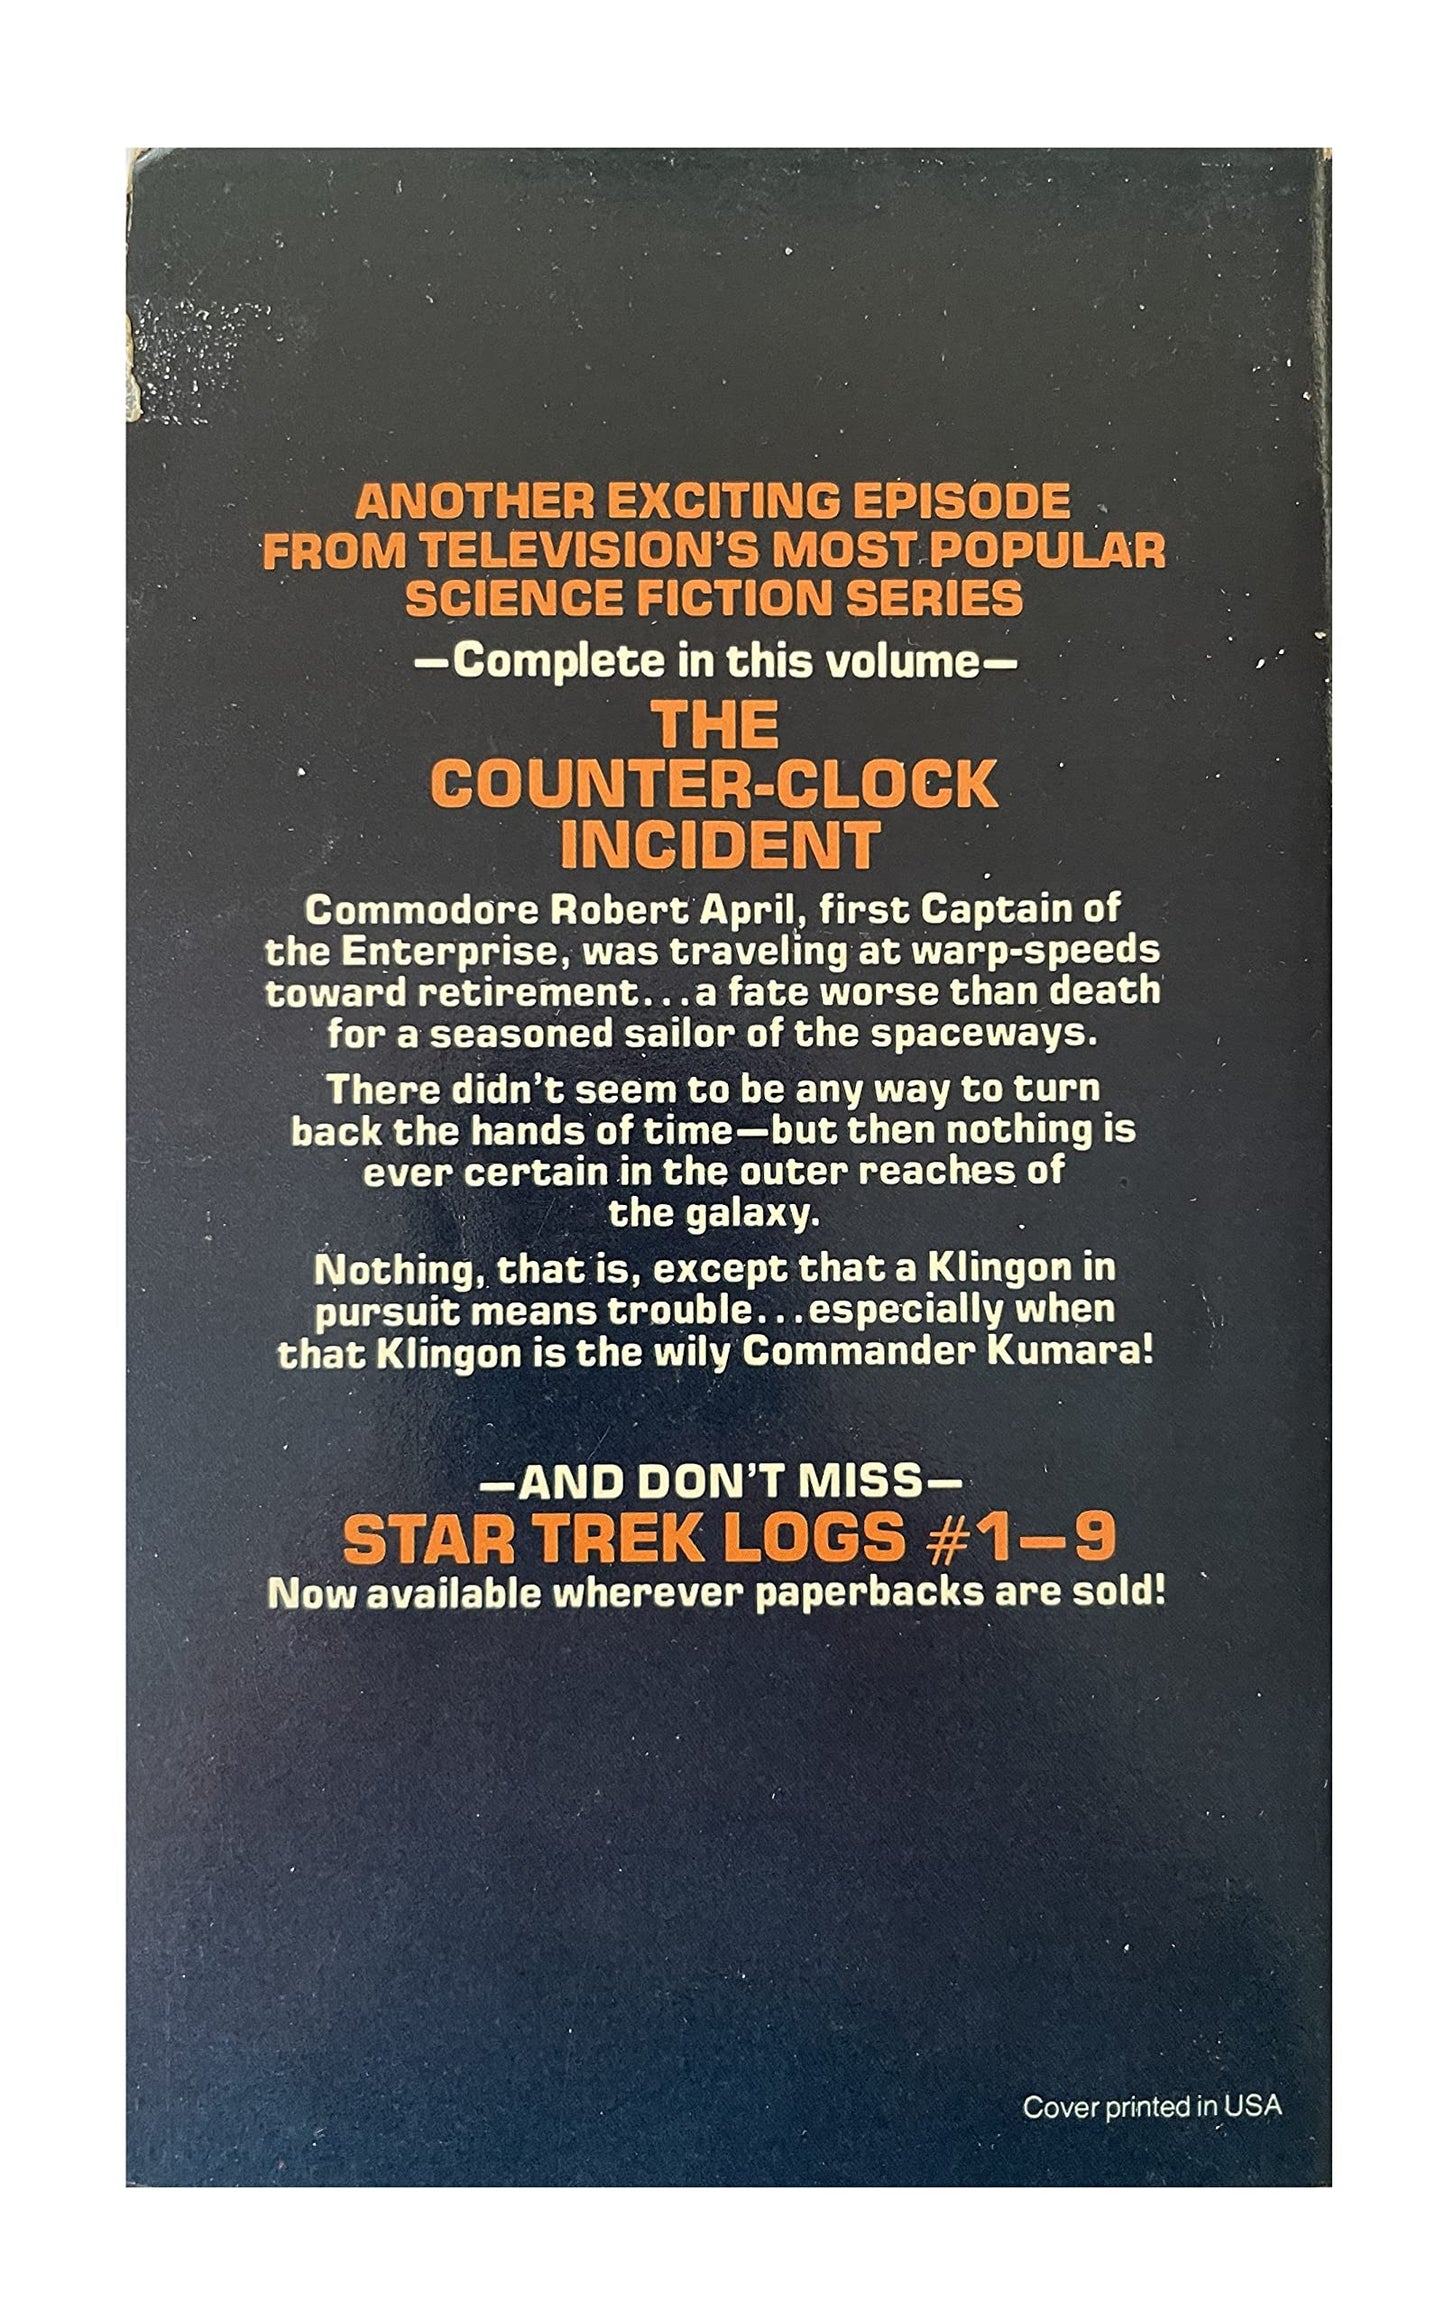 Vintage 1978 Star Trek Log Seven - Adapted From The Animated TV Series - Paperback Book - By Alan Dean Foster